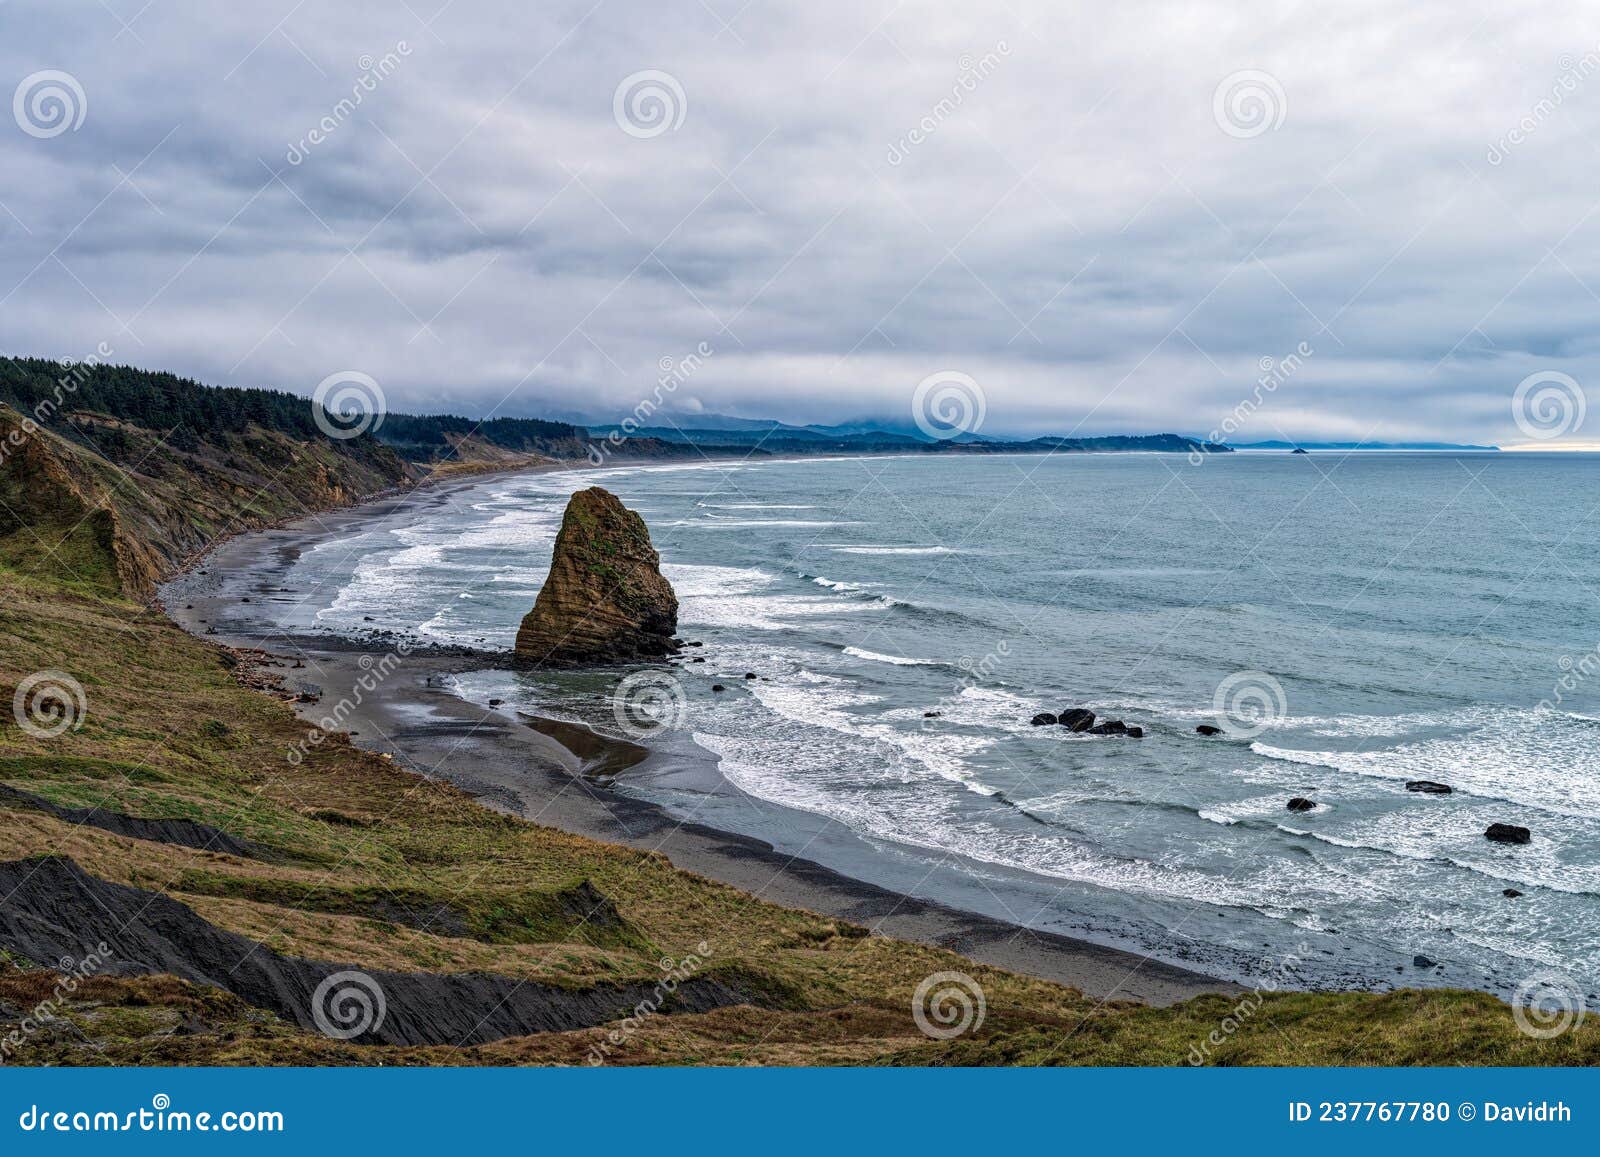 a sea stack dominates the beach on a foggy day at cape blanco state park, oregon, usa